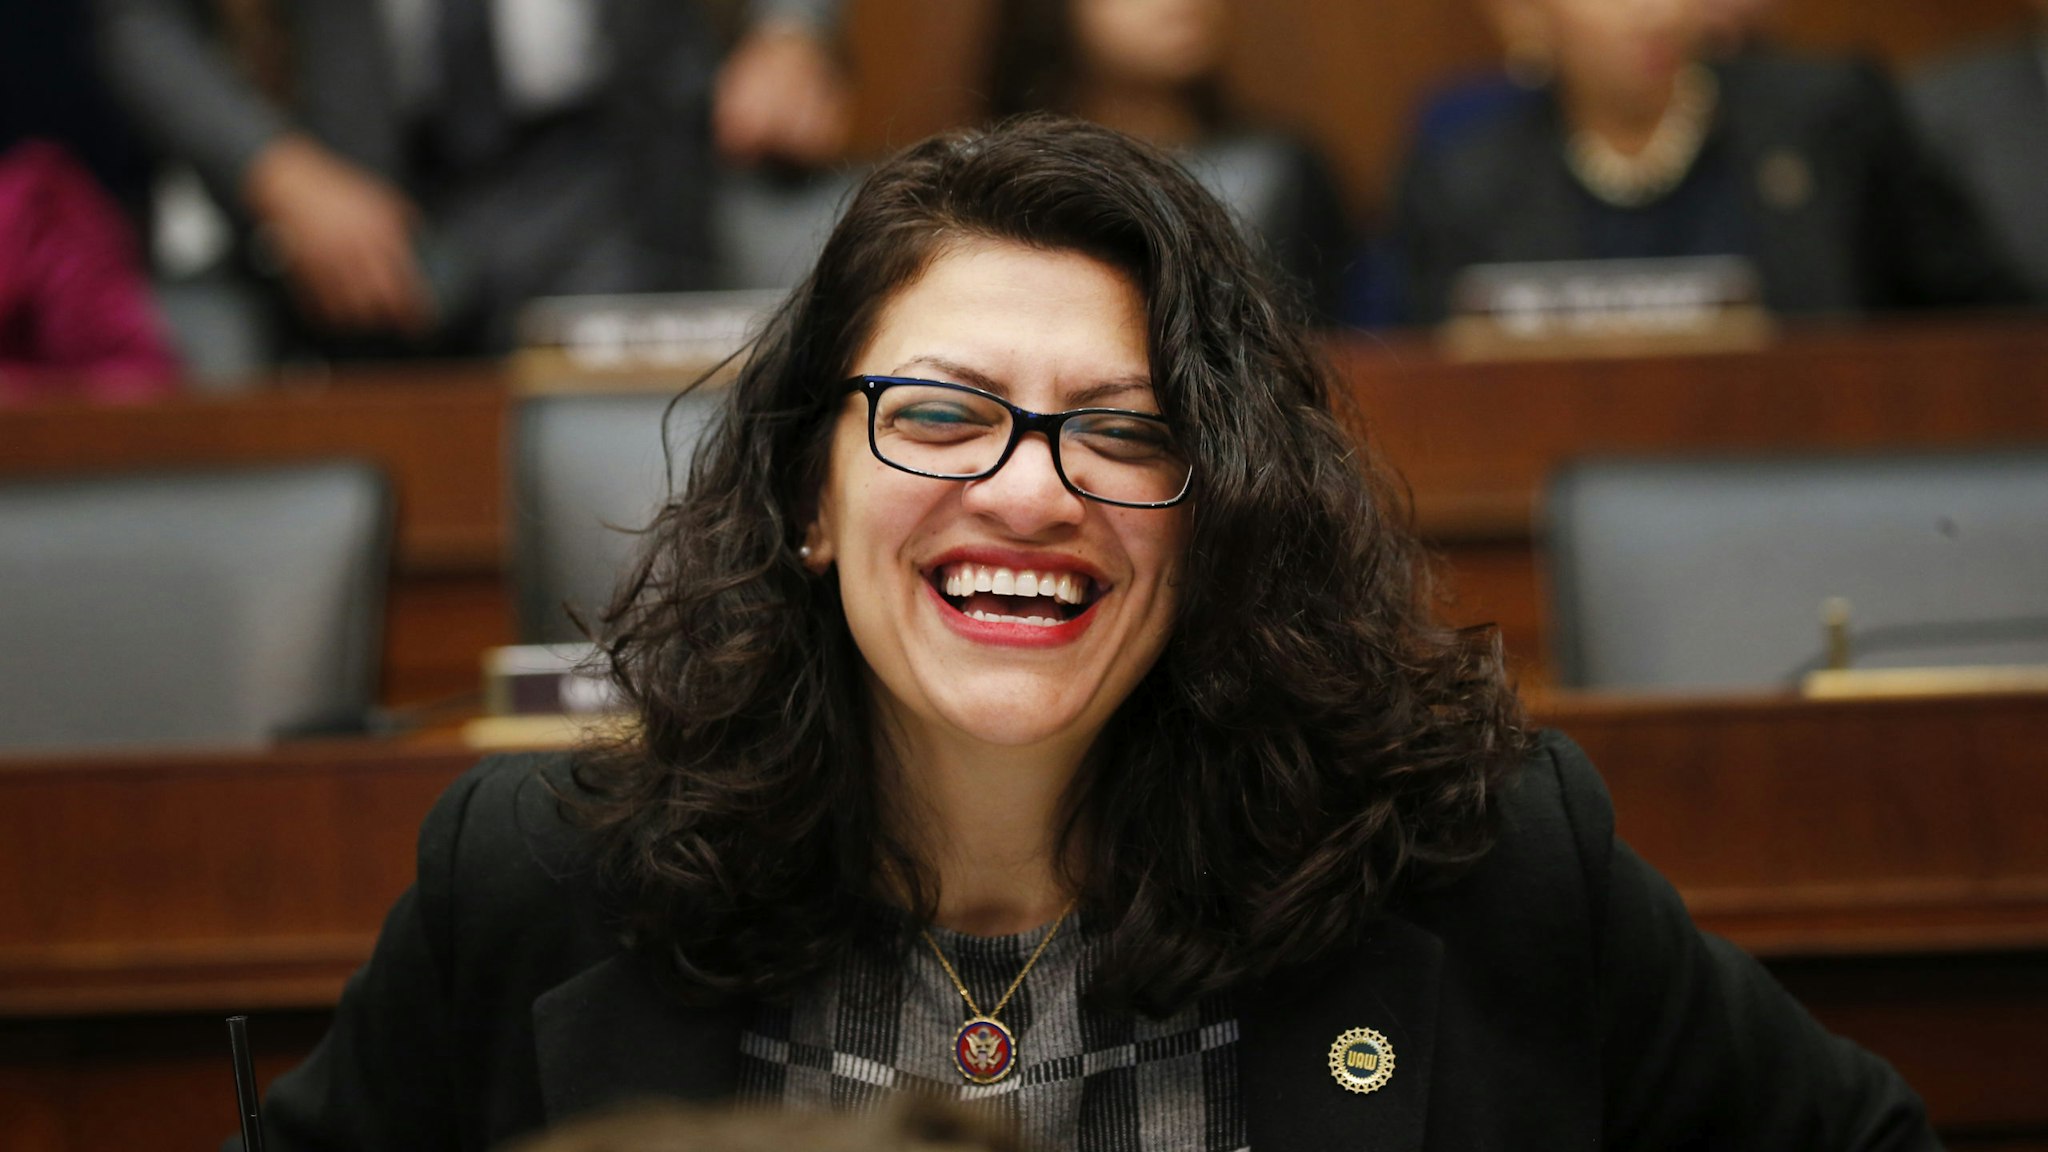 Representative Rashida Tlaib, a Democrat from Michigan, smiles before the start of a House Financial Services Committee hearing with Mark Zuckerberg, chief executive officer and founder of Facebook Inc., in Washington, D.C., U.S., on Wednesday, Oct. 23, 2019. Despite spending record amounts of money to influence Washington policy, Facebook's efforts to ingratiate itself so far have done little to assuage policy makers' privacy and antitrust concerns and in some cases have even made the company's challenges worse, according to first-hand accounts of its efforts.